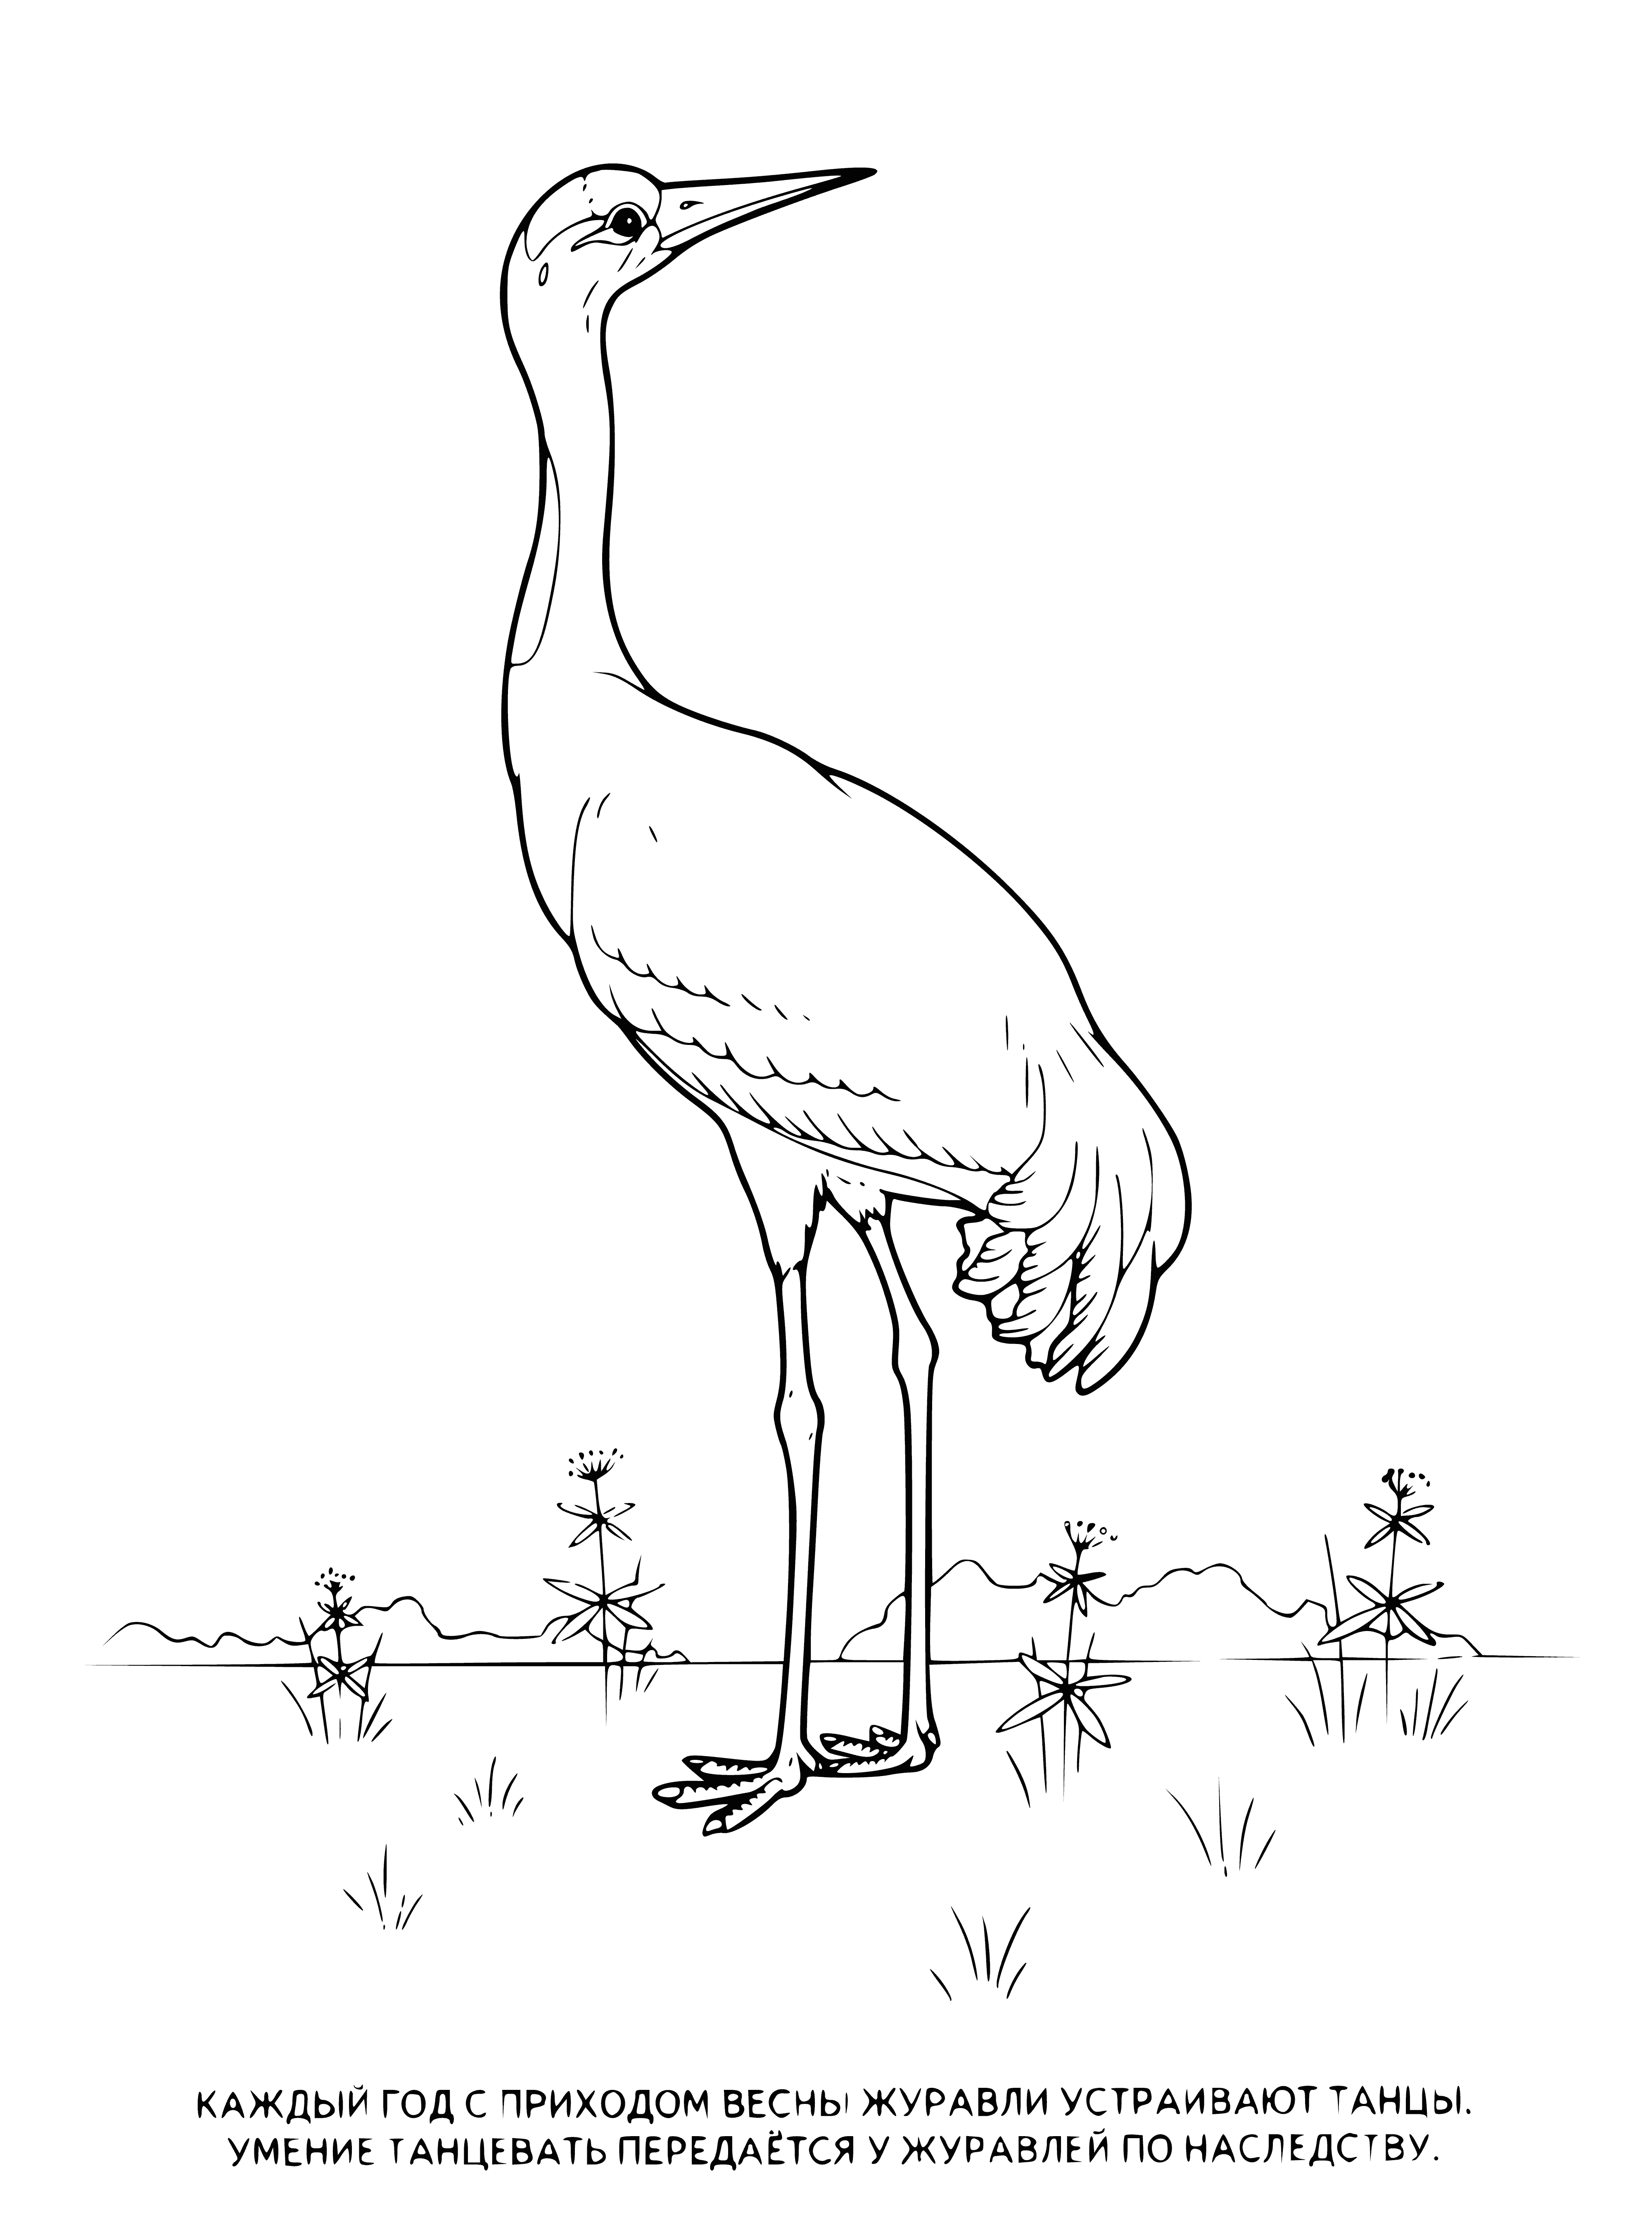 coloring page: Crane is a tall, thin bird with long neck, legs, beak; grey & white body, grey wings; standing on wet, muddy ground with body of water in distance.